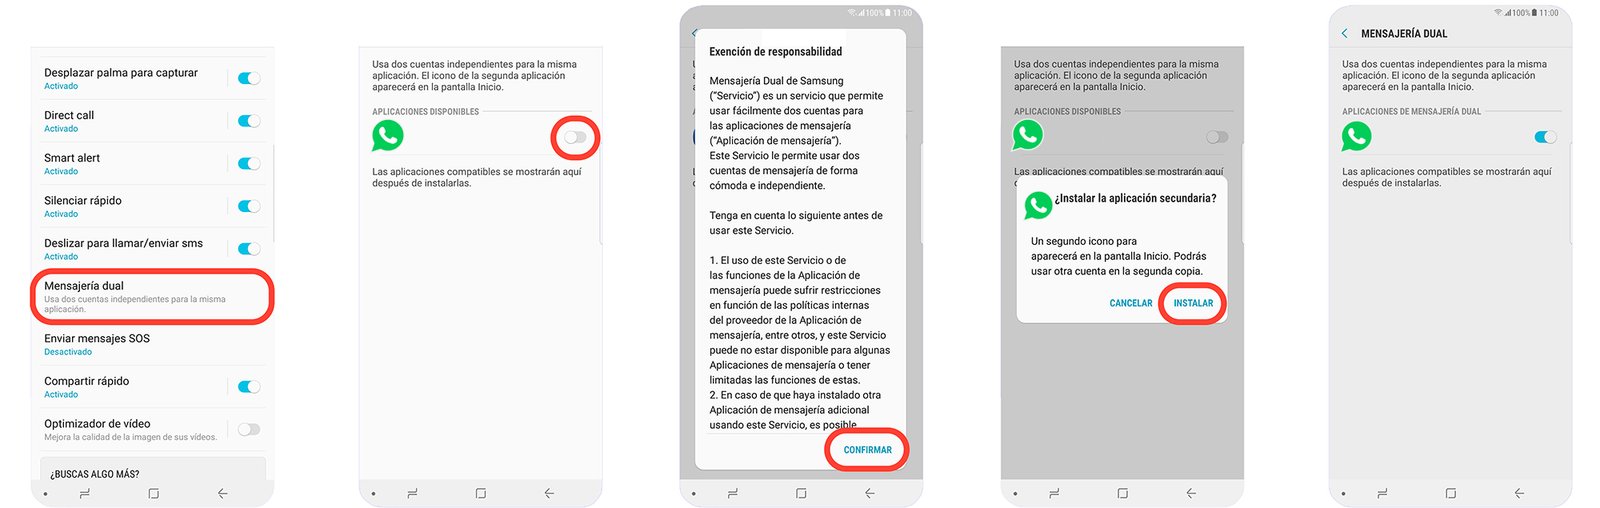 How to use WhatsApp with two accounts at the same time